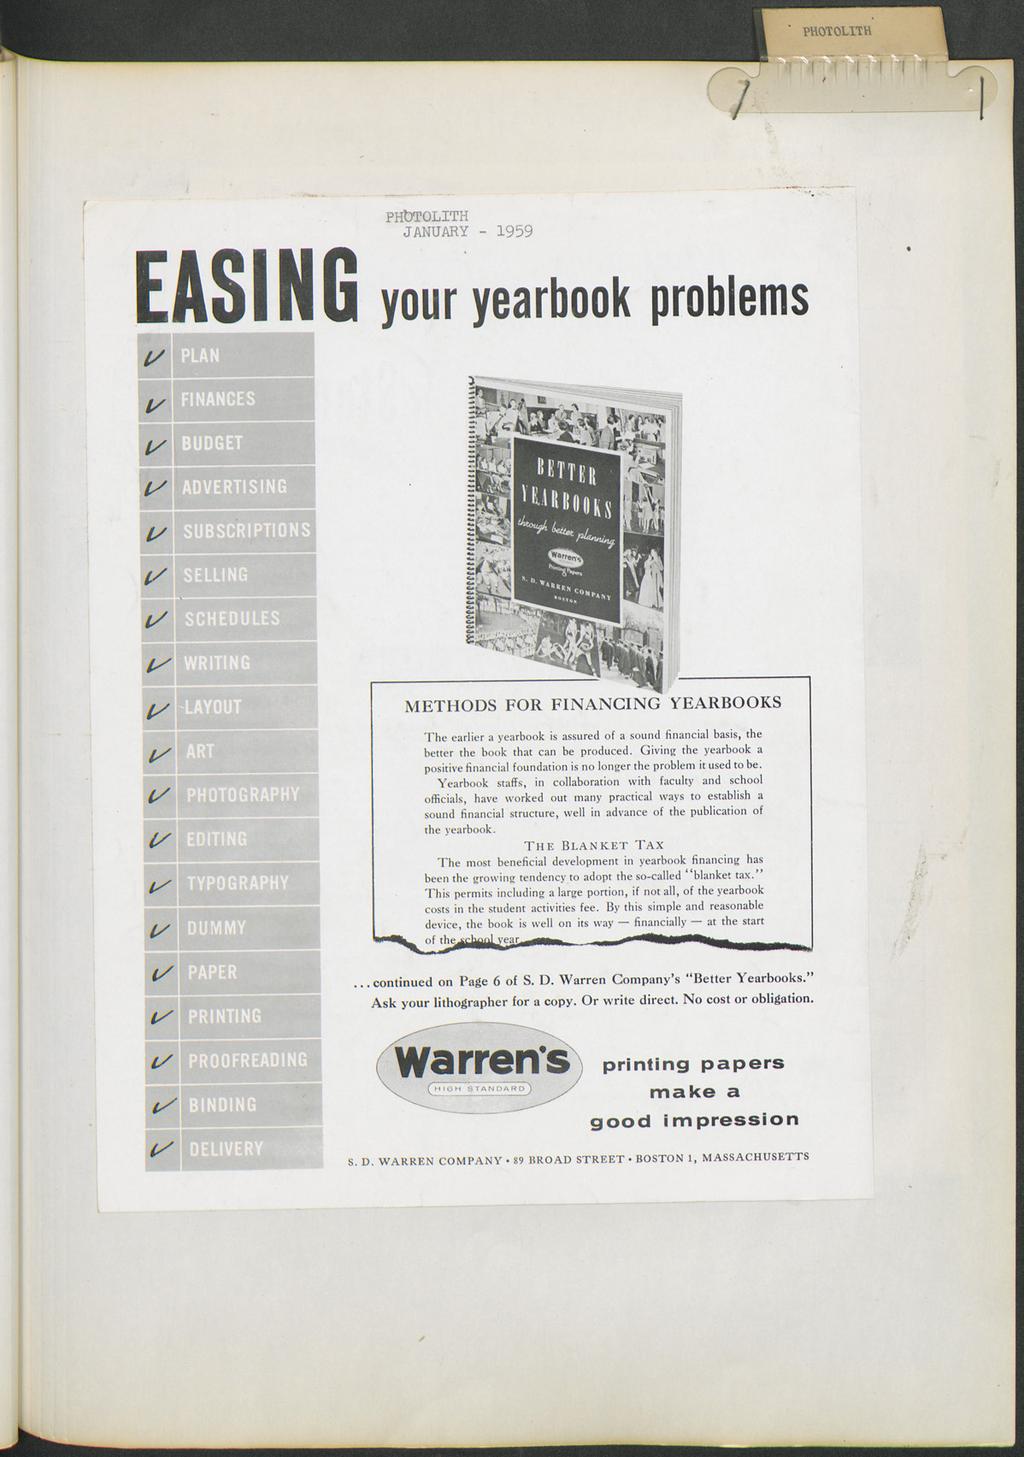 PROT OLITH PHOTOLITH JANUARY - 1959 EASING your yearbook problems Z.111 -t`t. 4. 41. 411. 166. 41. 1. or.